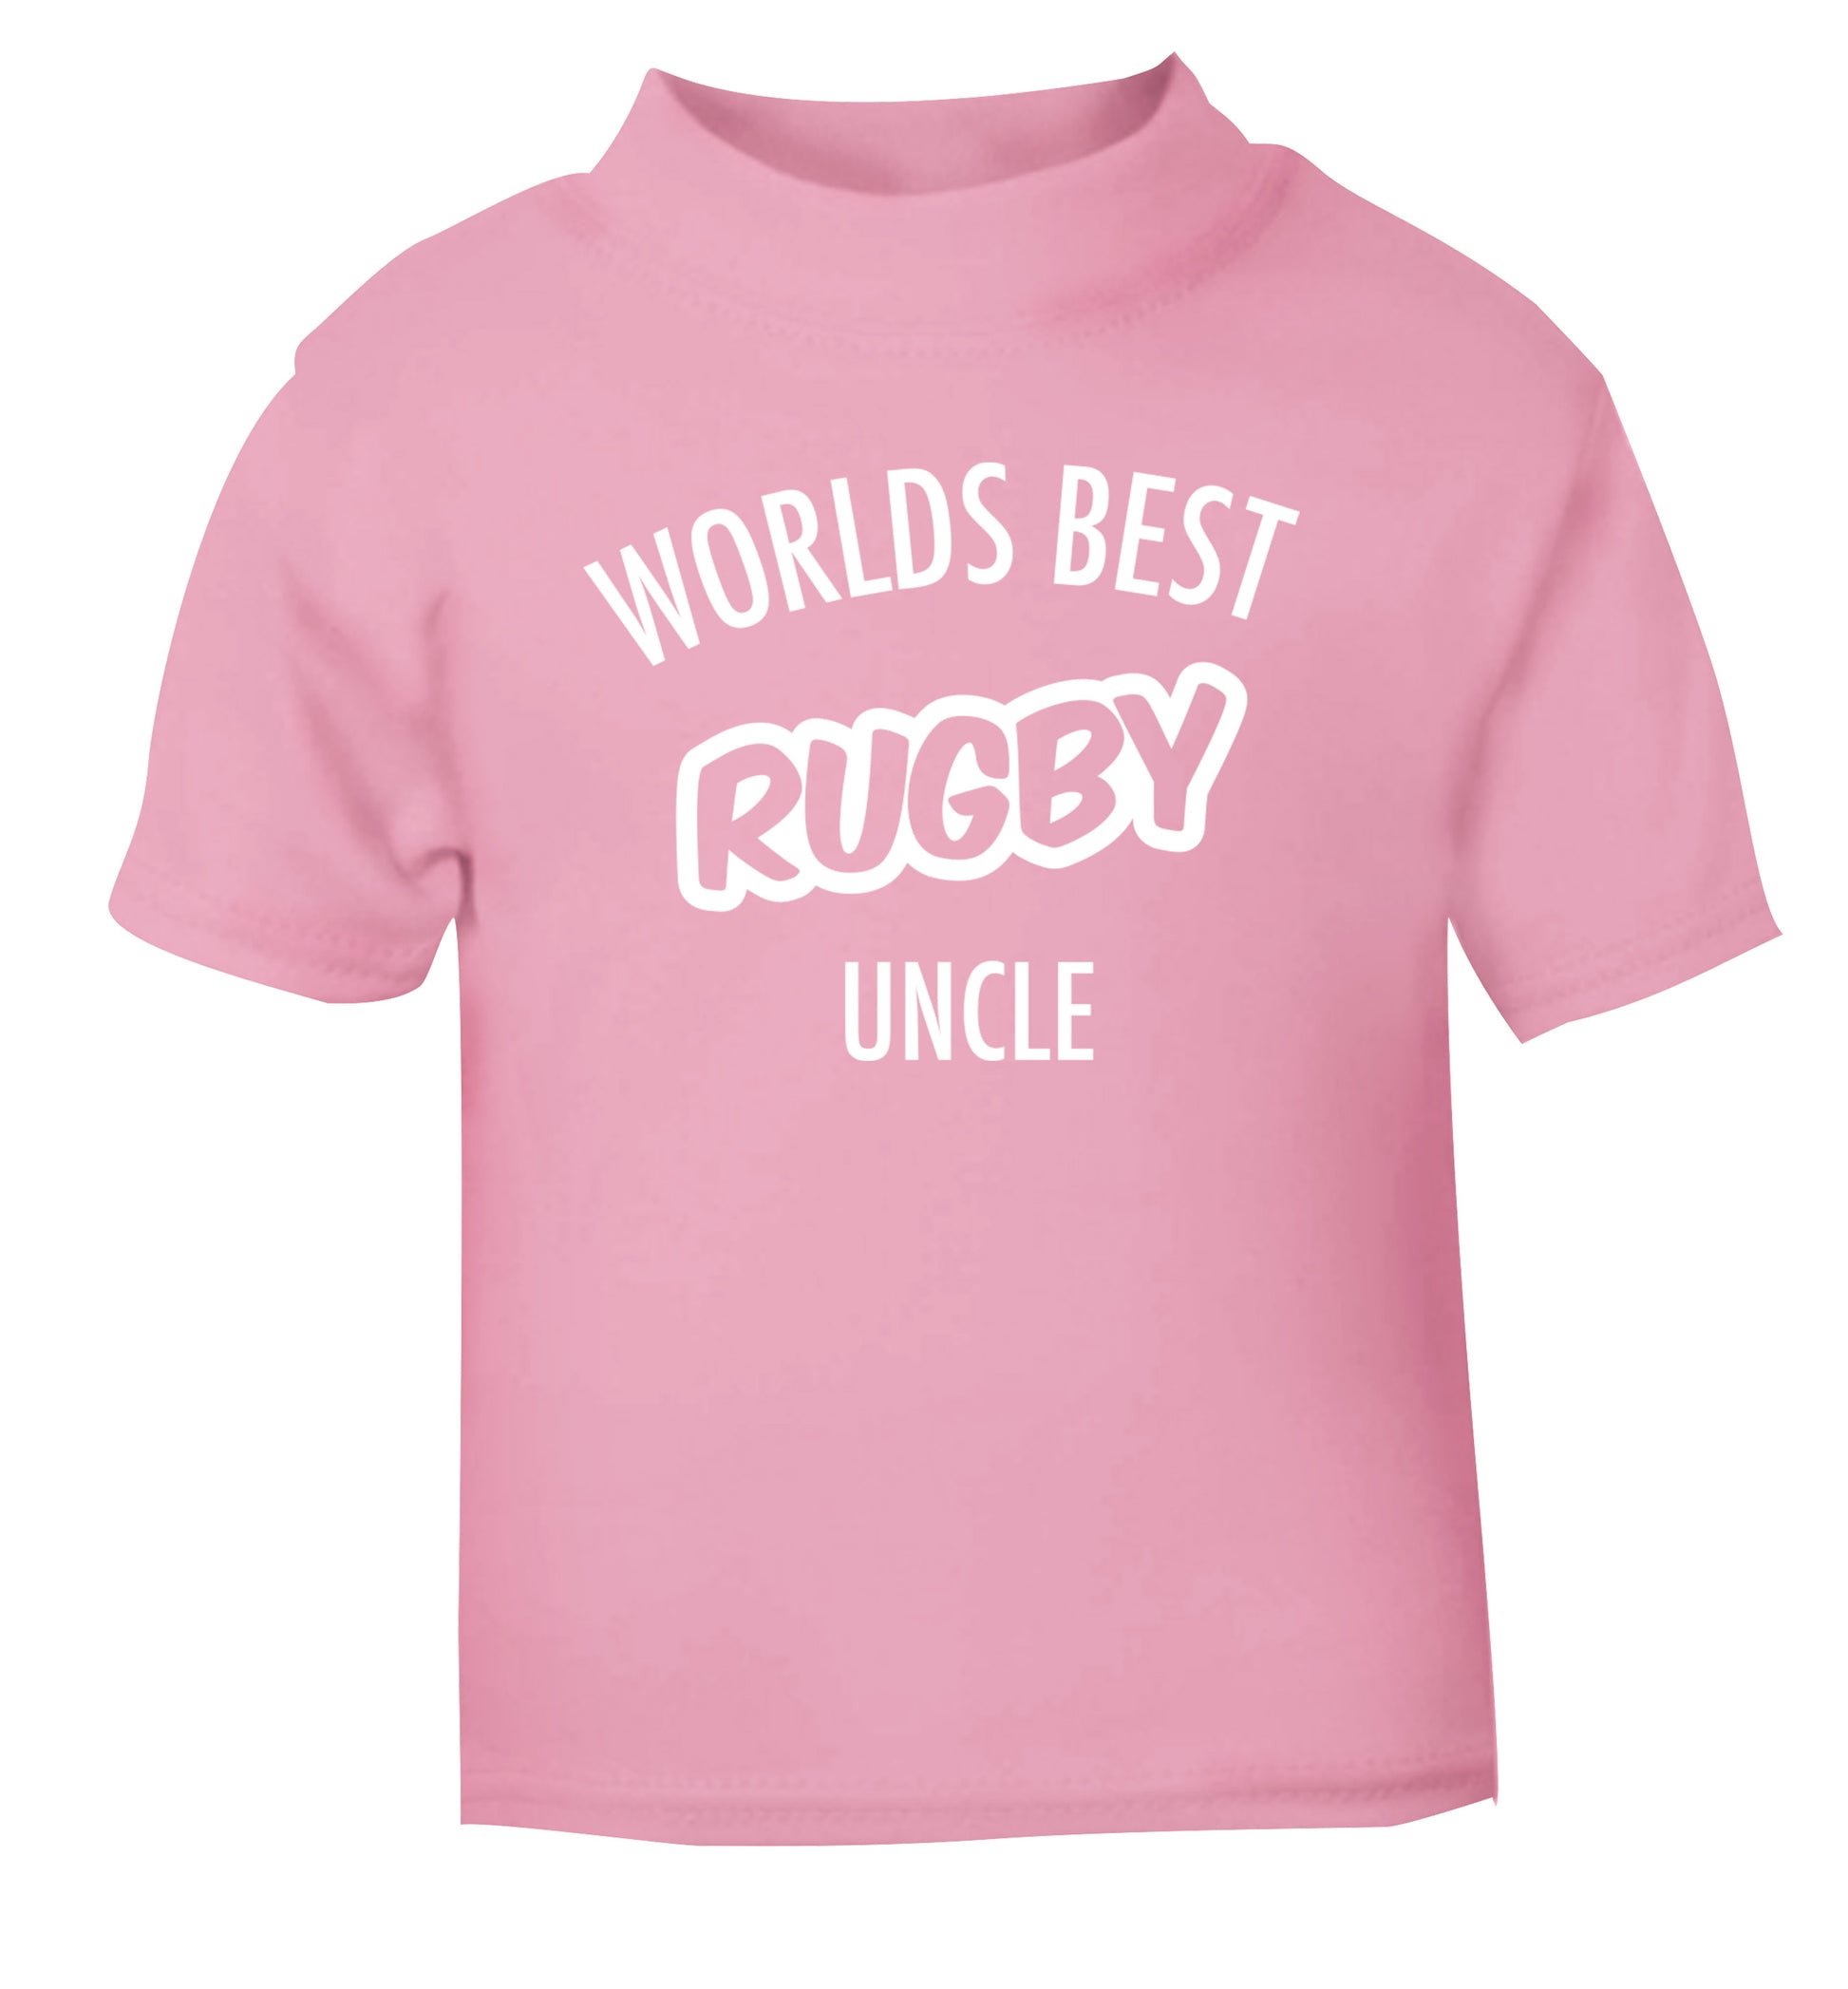 Worlds best rugby uncle light pink Baby Toddler Tshirt 2 Years